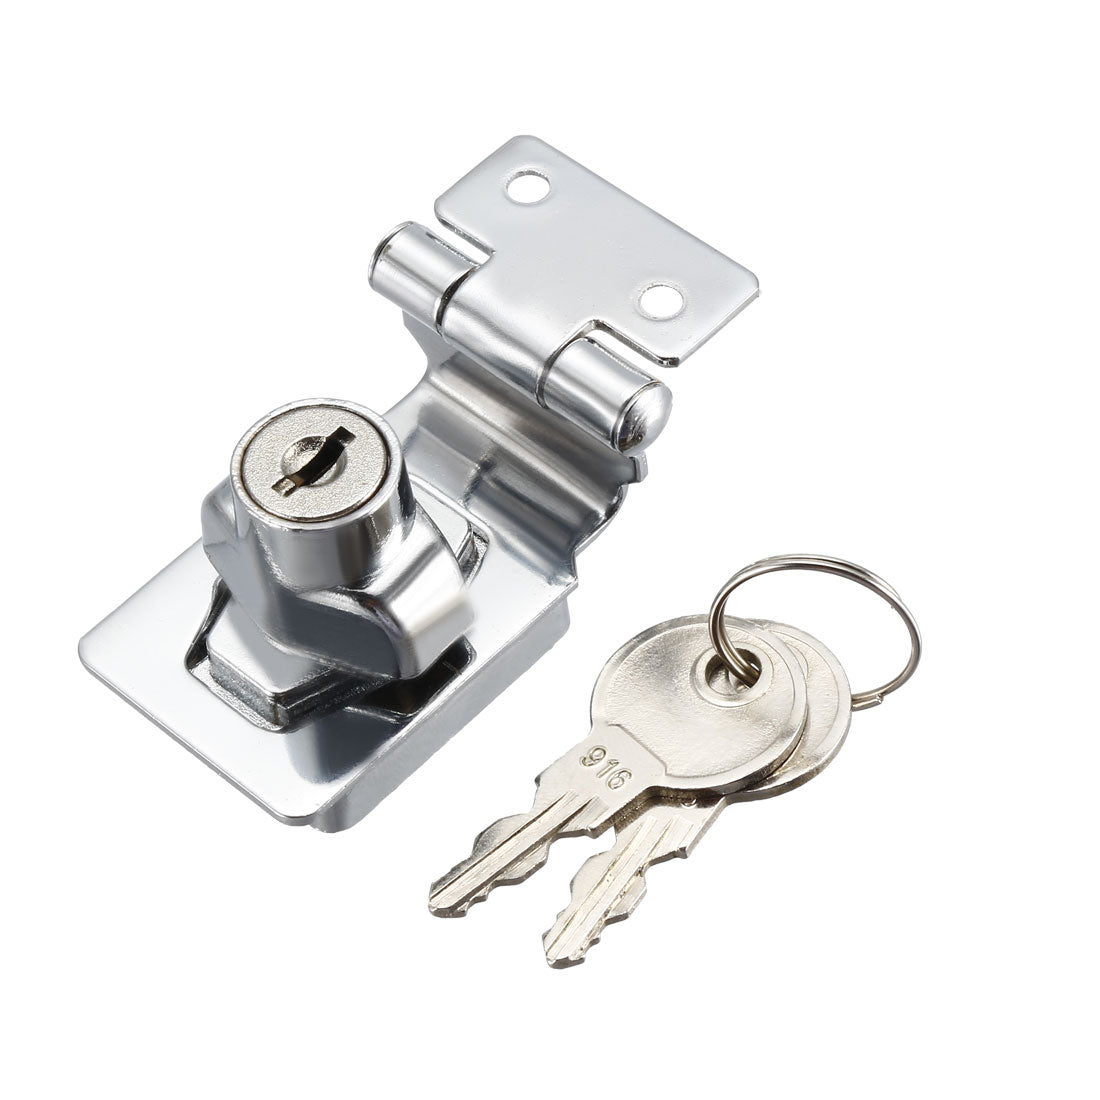 uxcell Uxcell Keyed Hasp Lock 54mm Twist Knob Keyed Locking Hasp for Door Cabinet Keyed Different